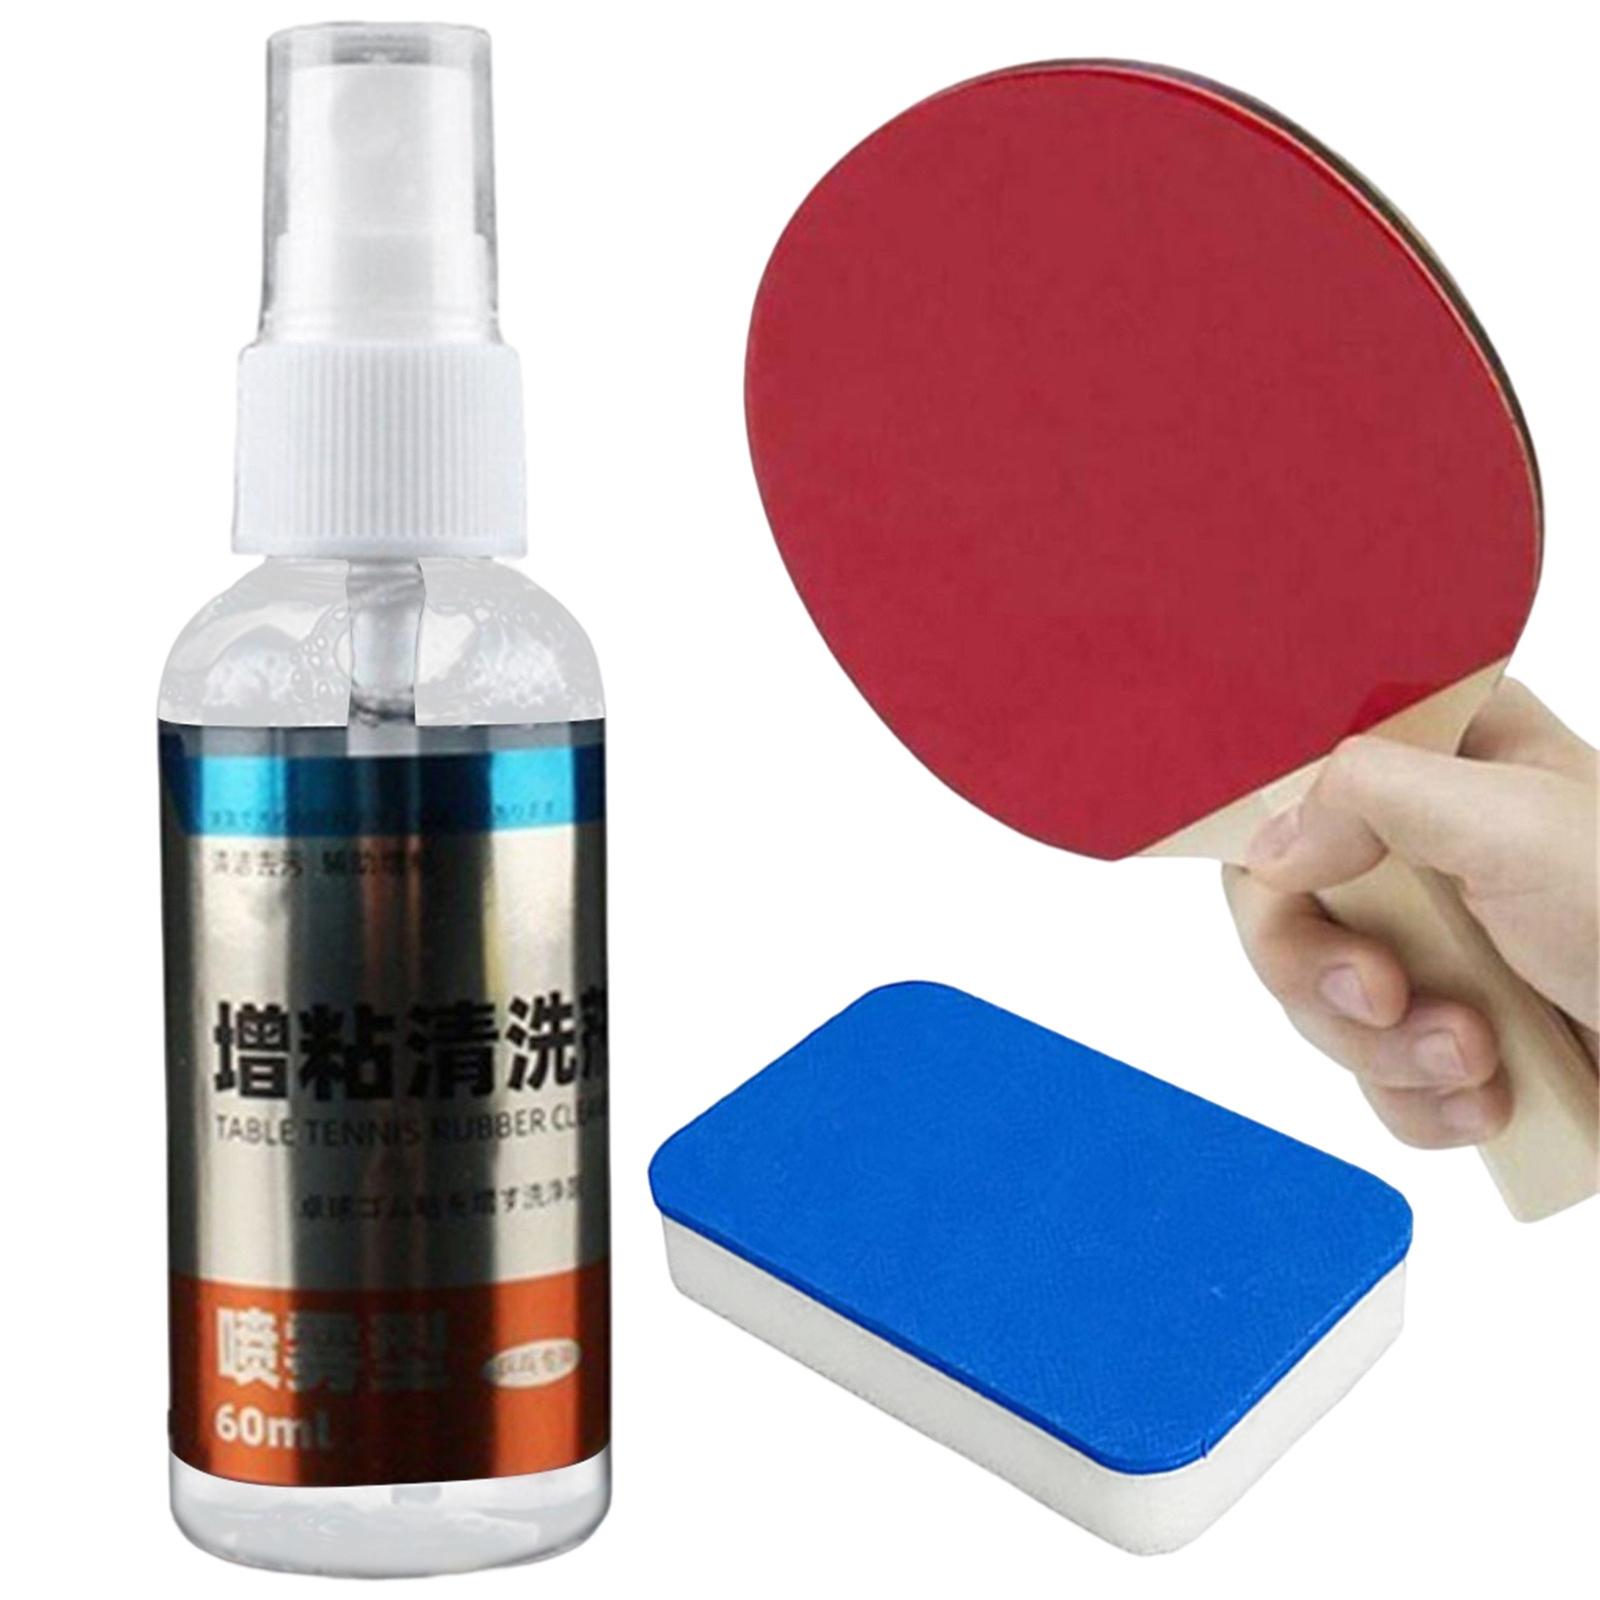 60ml Care Cleaning Agent Pingpong Paddle Cleaner Table Tennis Rubber Cleaner with accessories